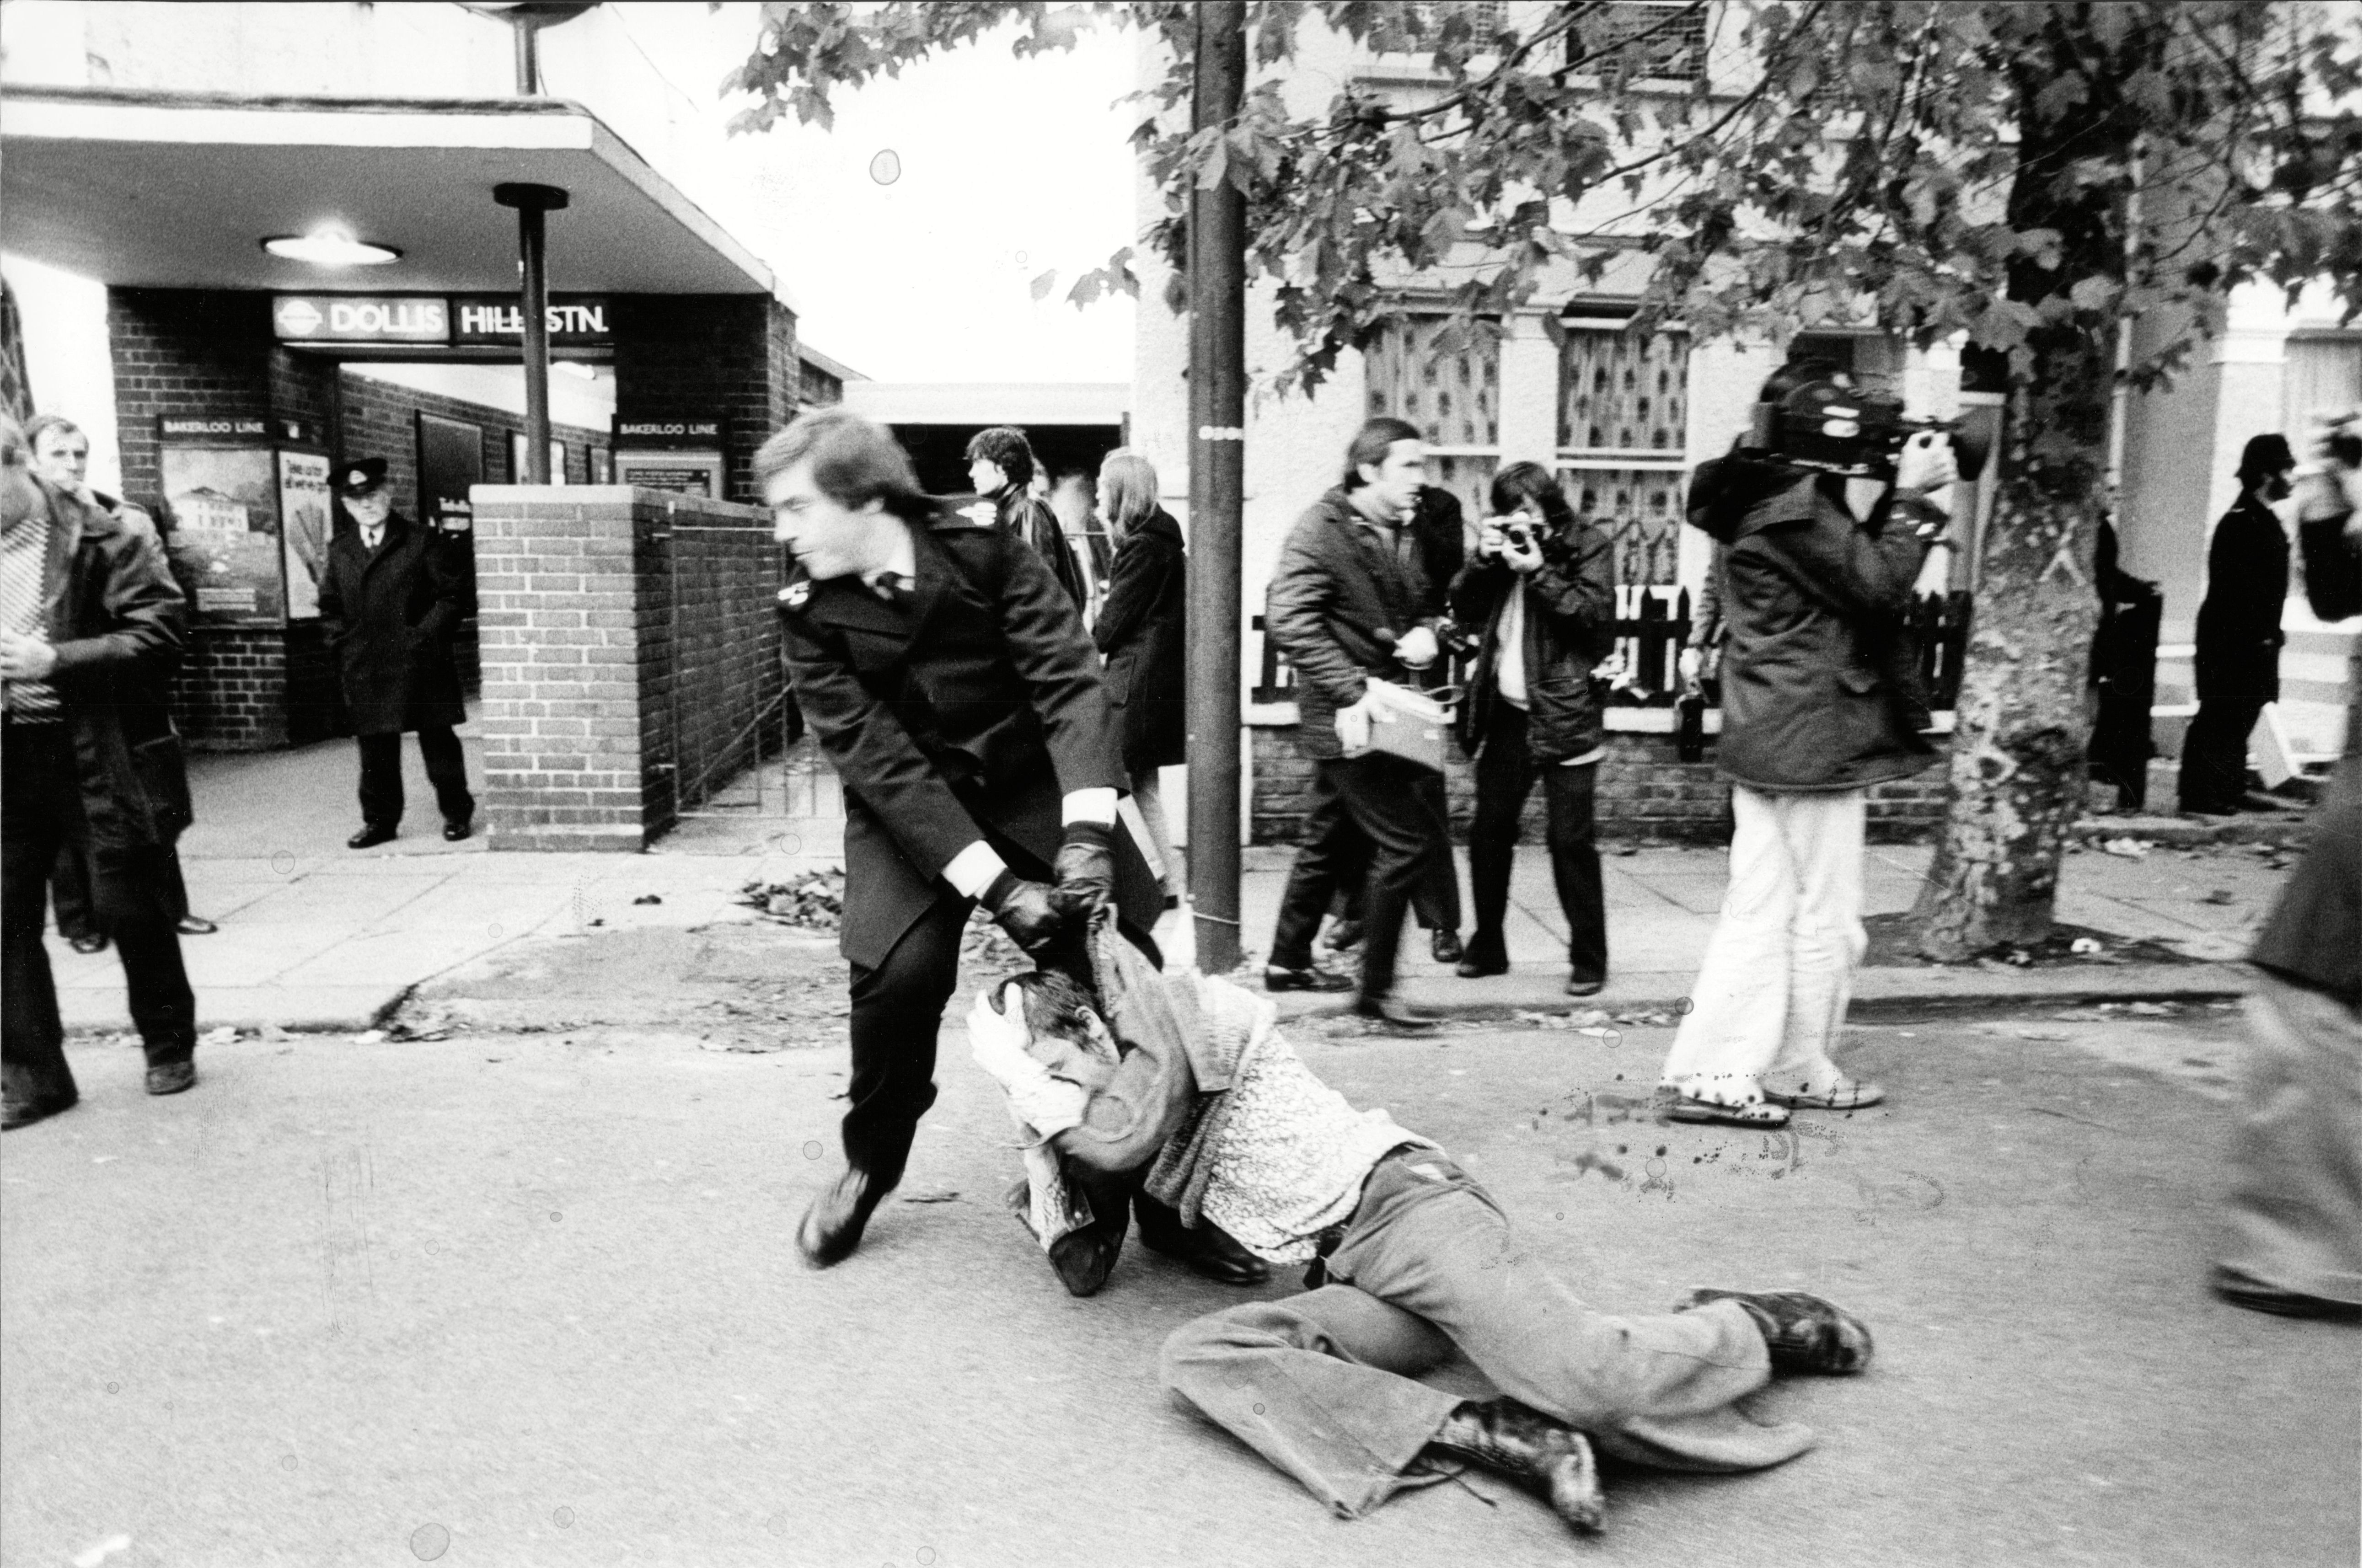 An Injured Picket Is Dragged Away By A Policeman In A Street Near The Grunwick Film Processing Lab In Willesden